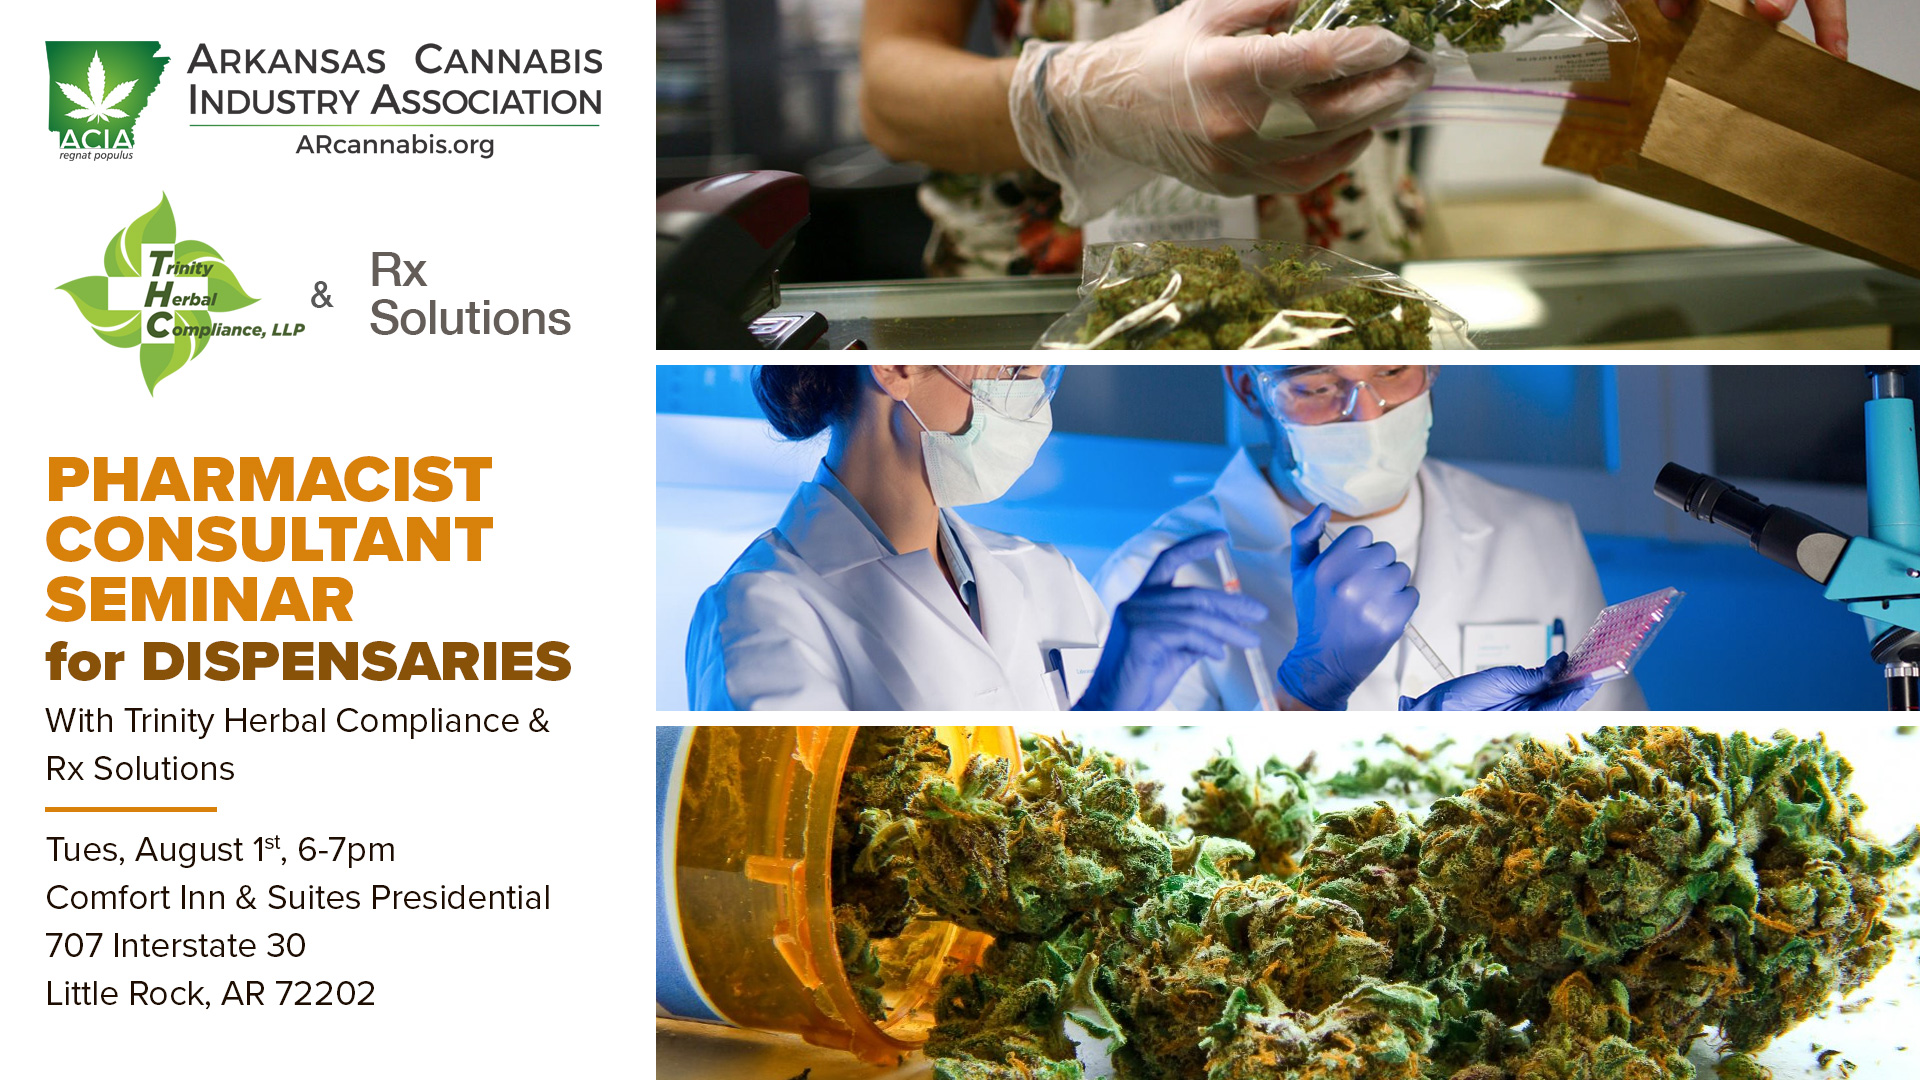 Pharmacist Consultant Seminar for Dispensaries – with Trinity Herbal Compliance & Rx Solutions